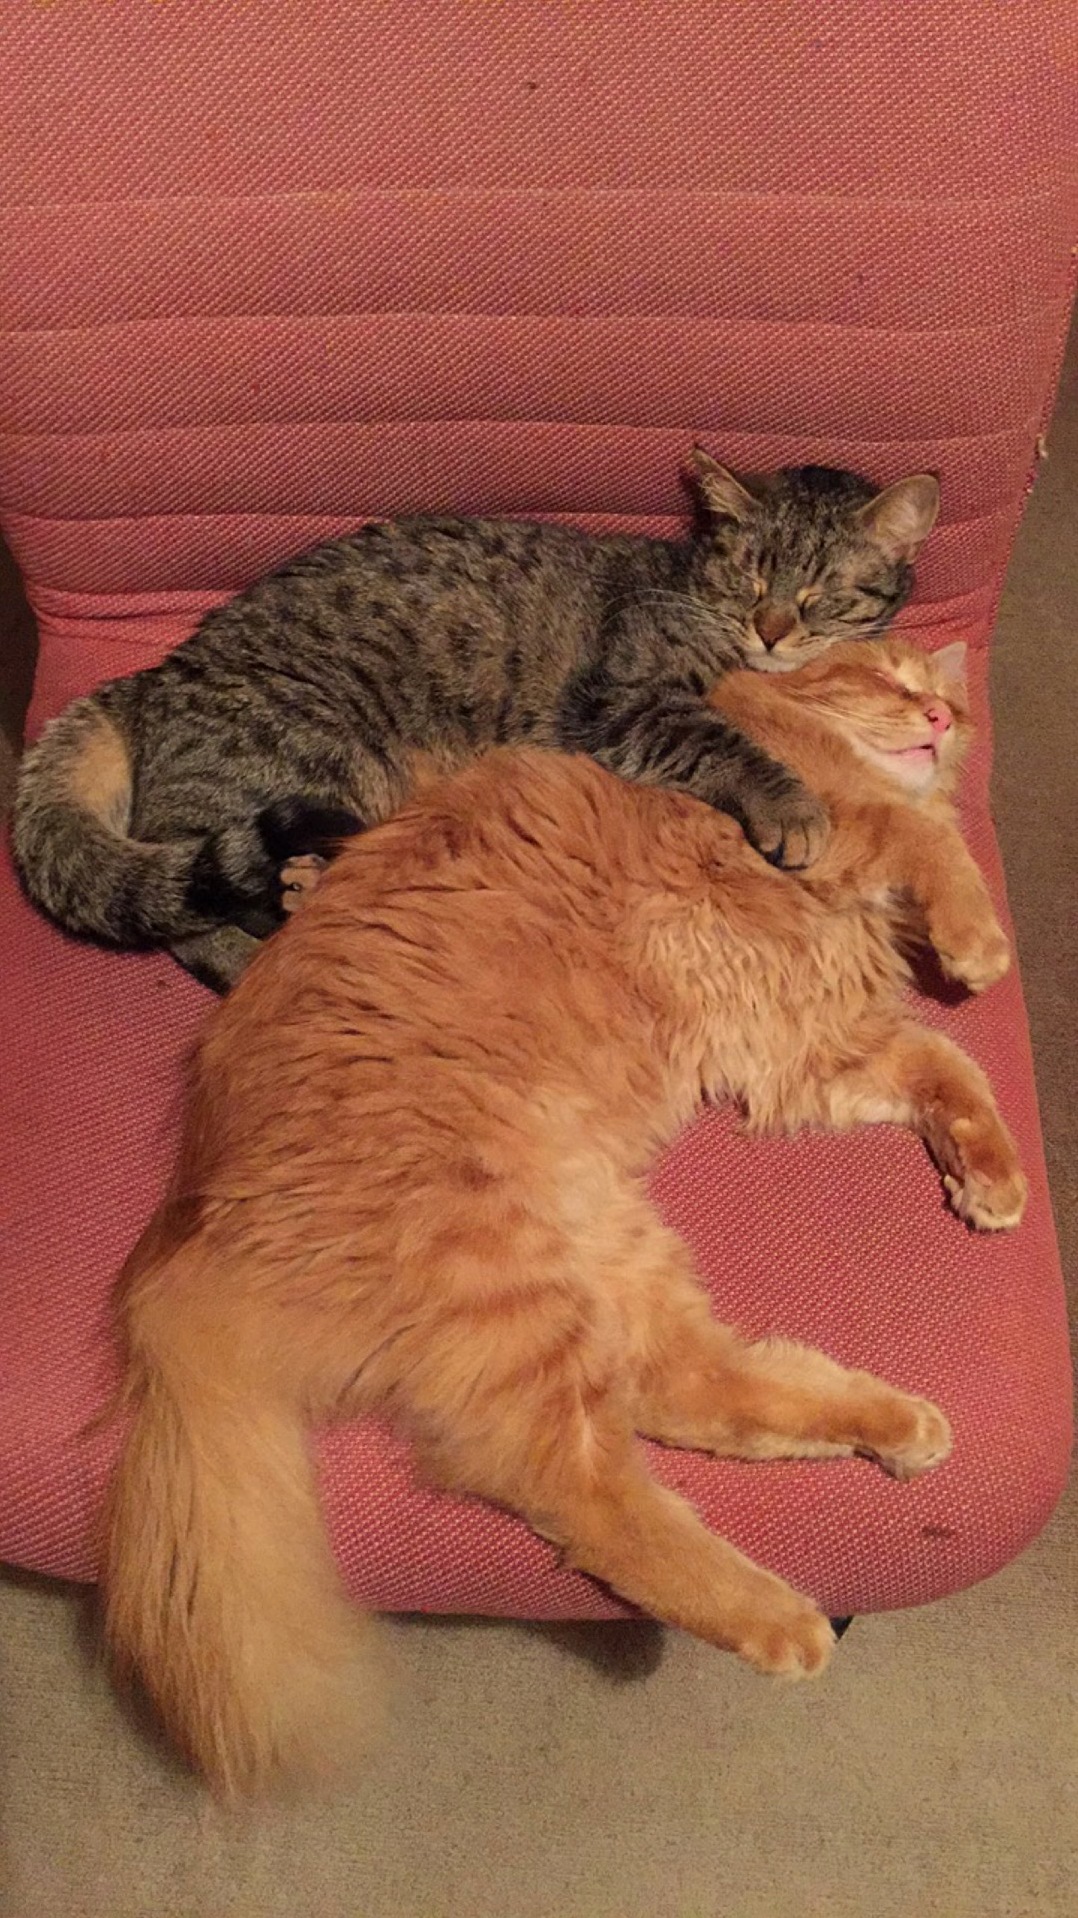 My cats are spooning